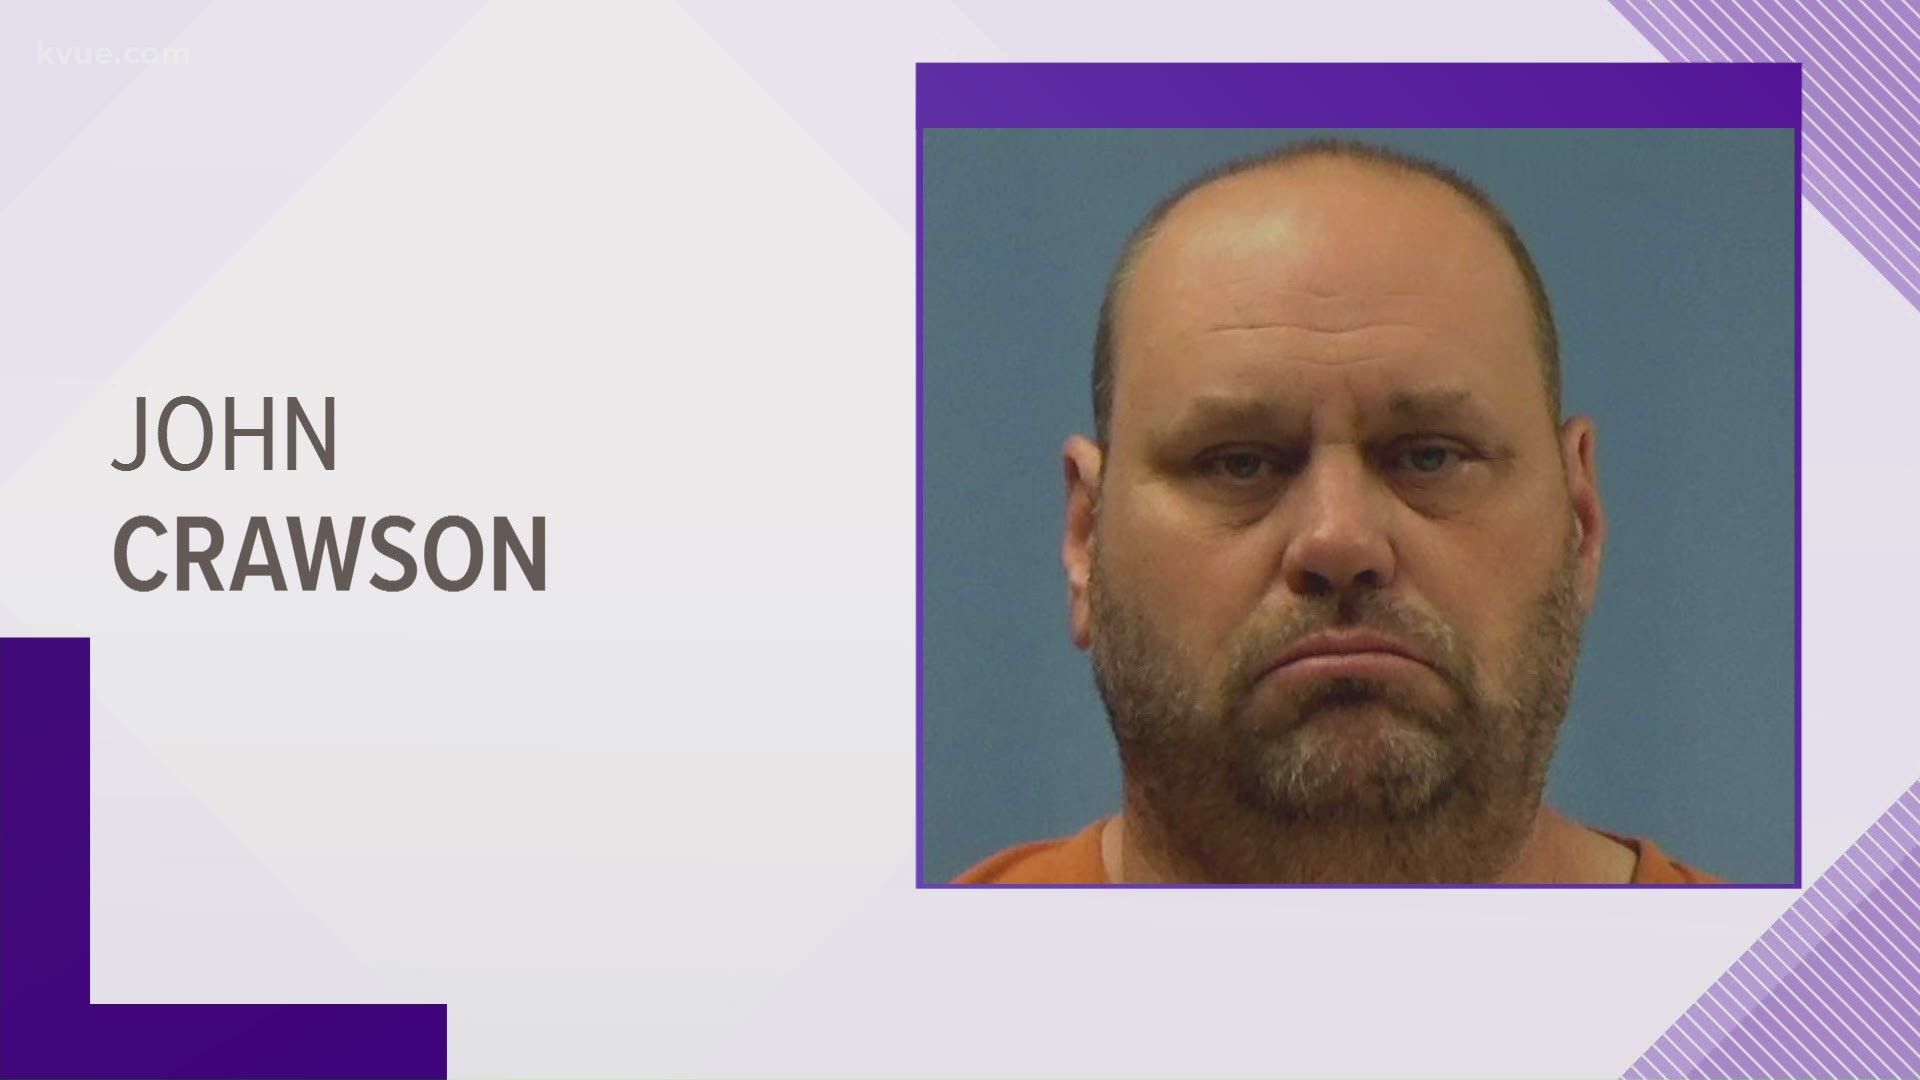 Williamson County is investigating after explosive devices were found at a man's home. John Crawson has been arrested and charged.